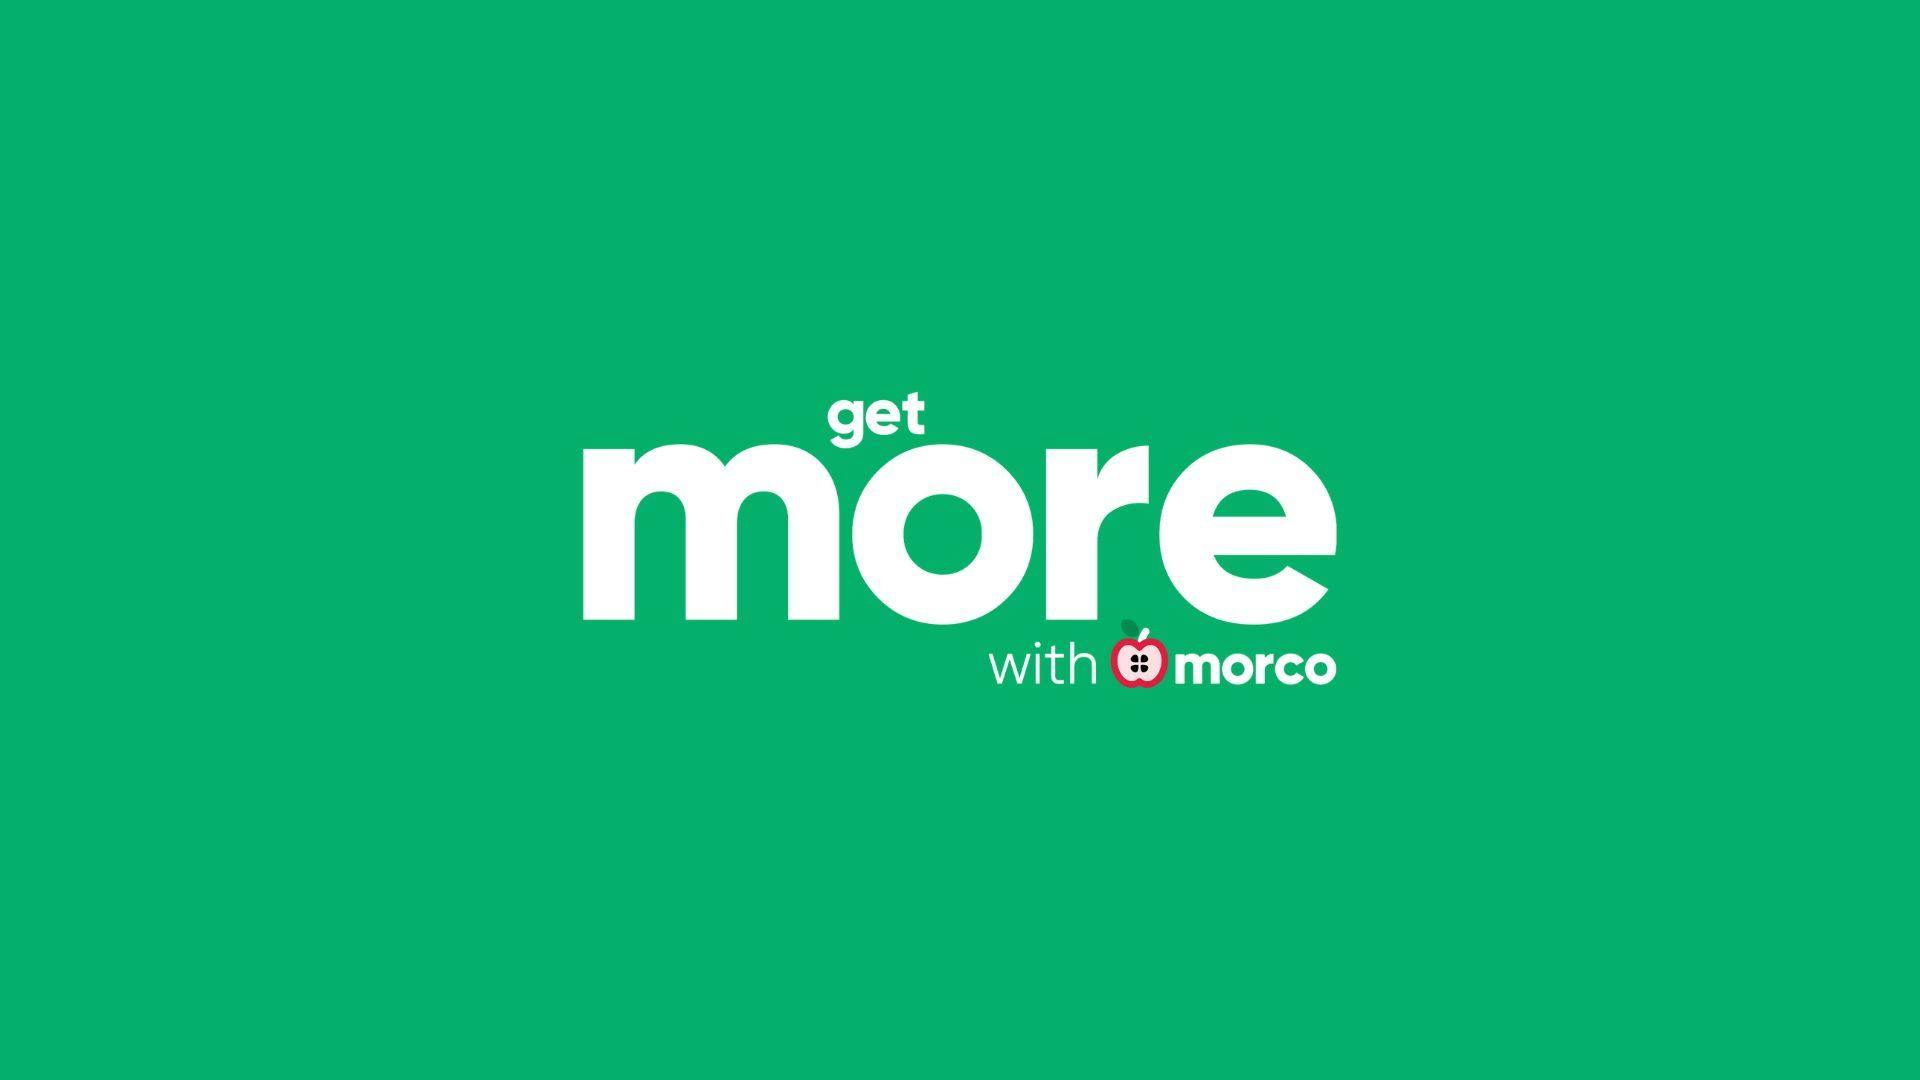 get more with Morco green lockup